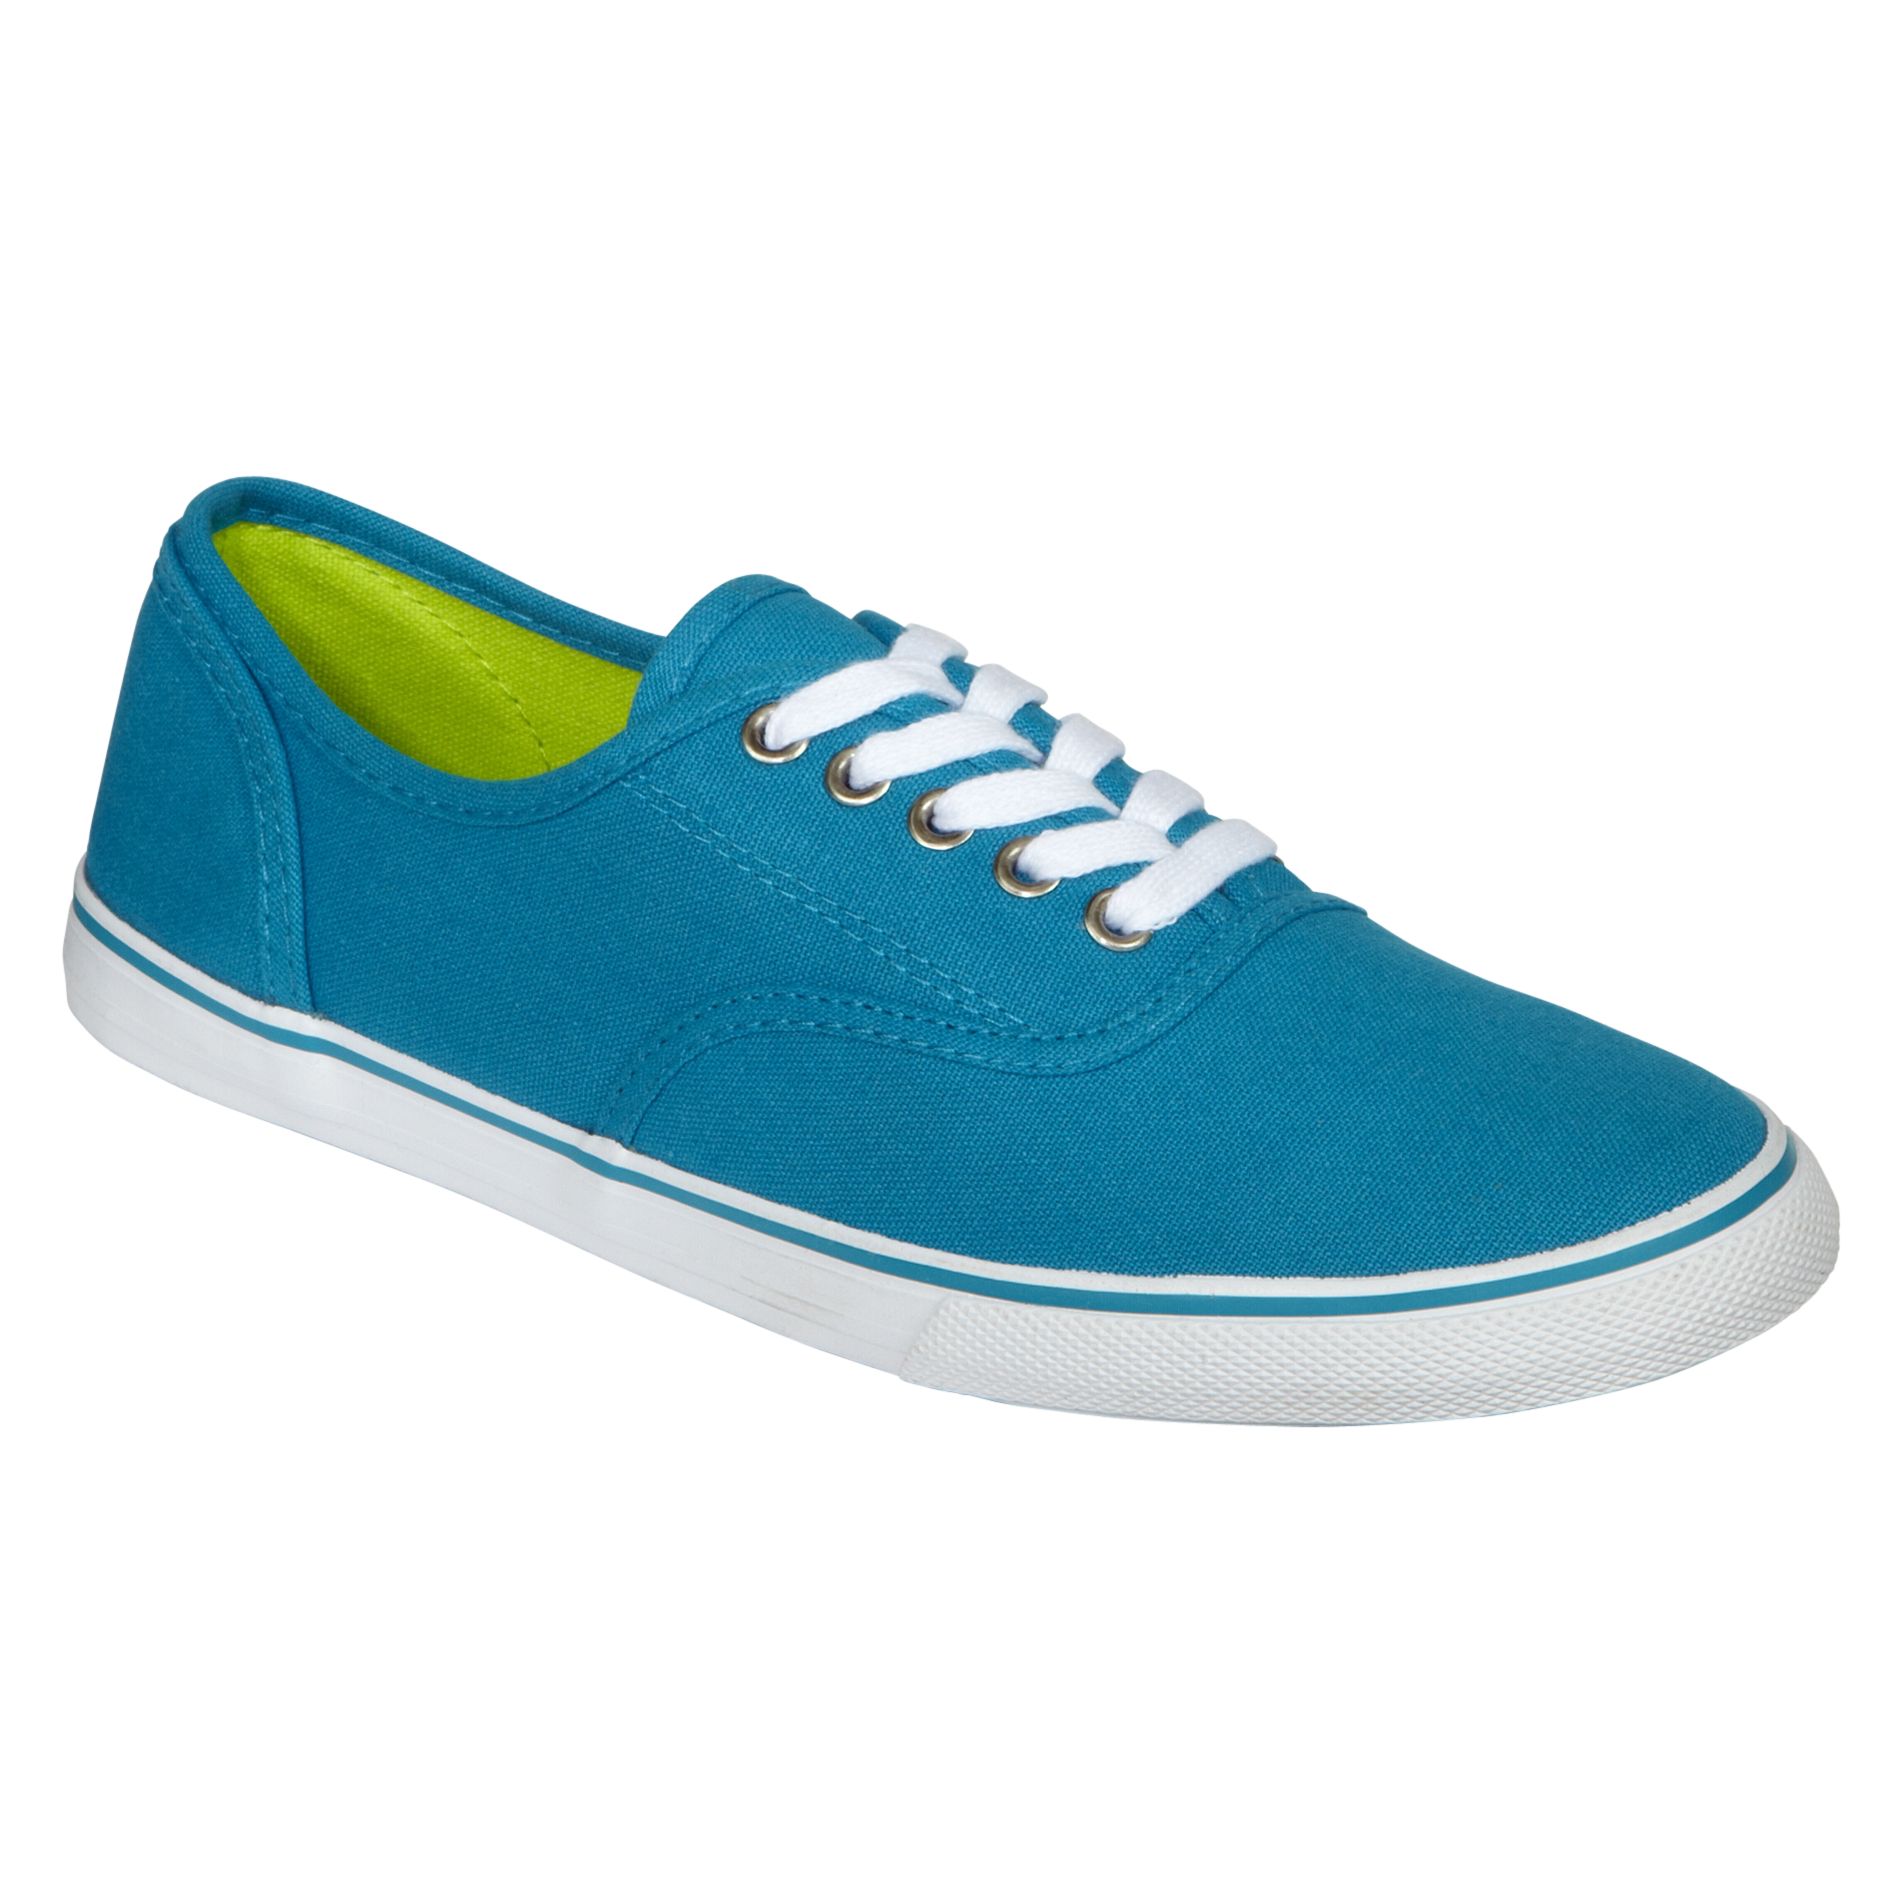 Bongo Women's Casual Caddy in Teal: Get Going in Colorful Sneakers from ...